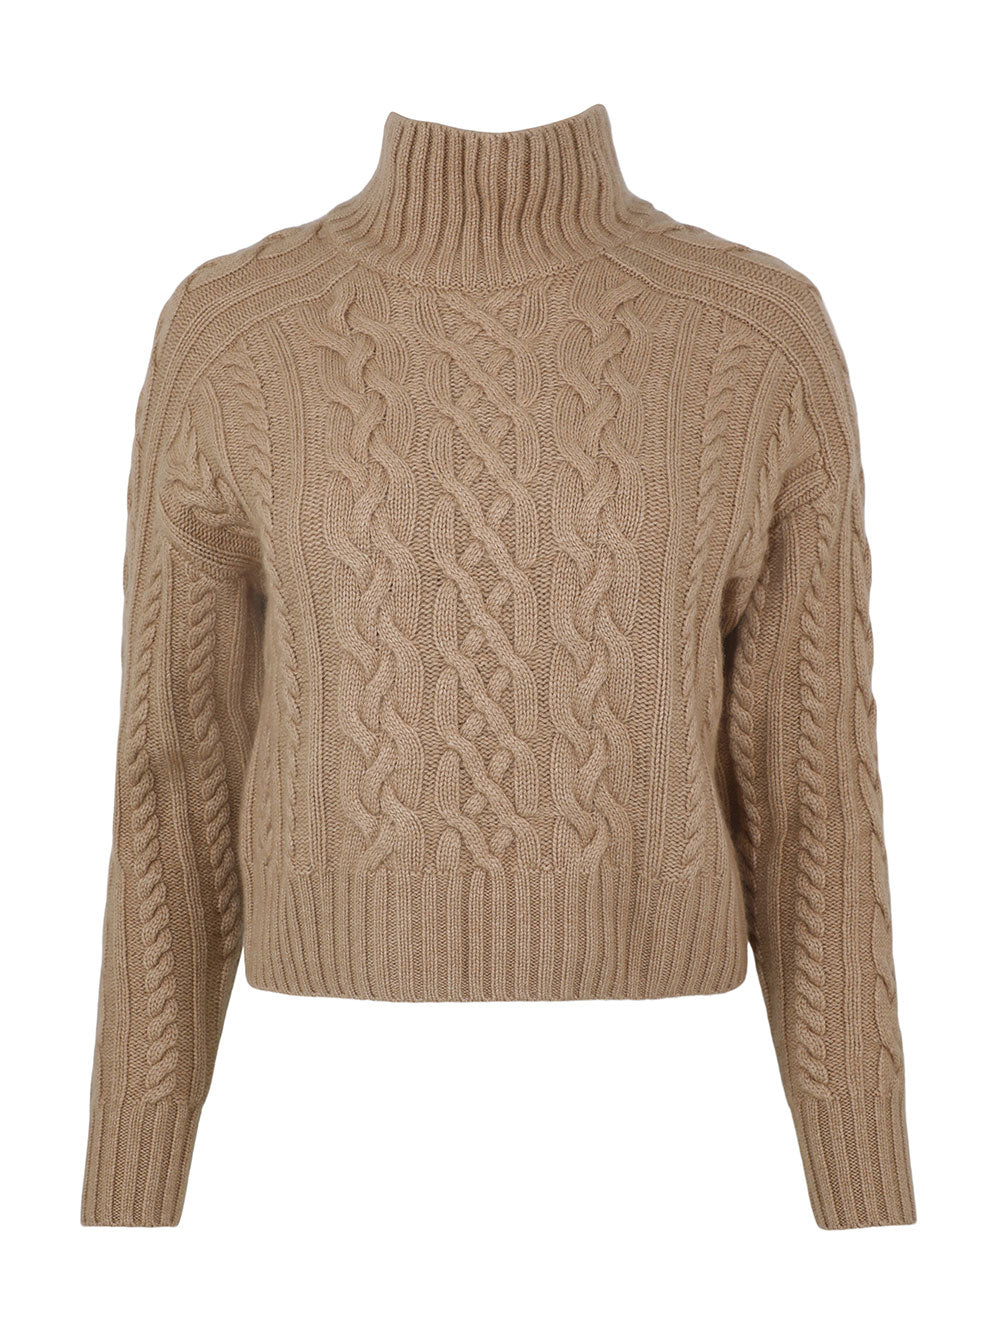 Autumn Cashmere Cropped Cable Mockneck Sweater (More Colors)